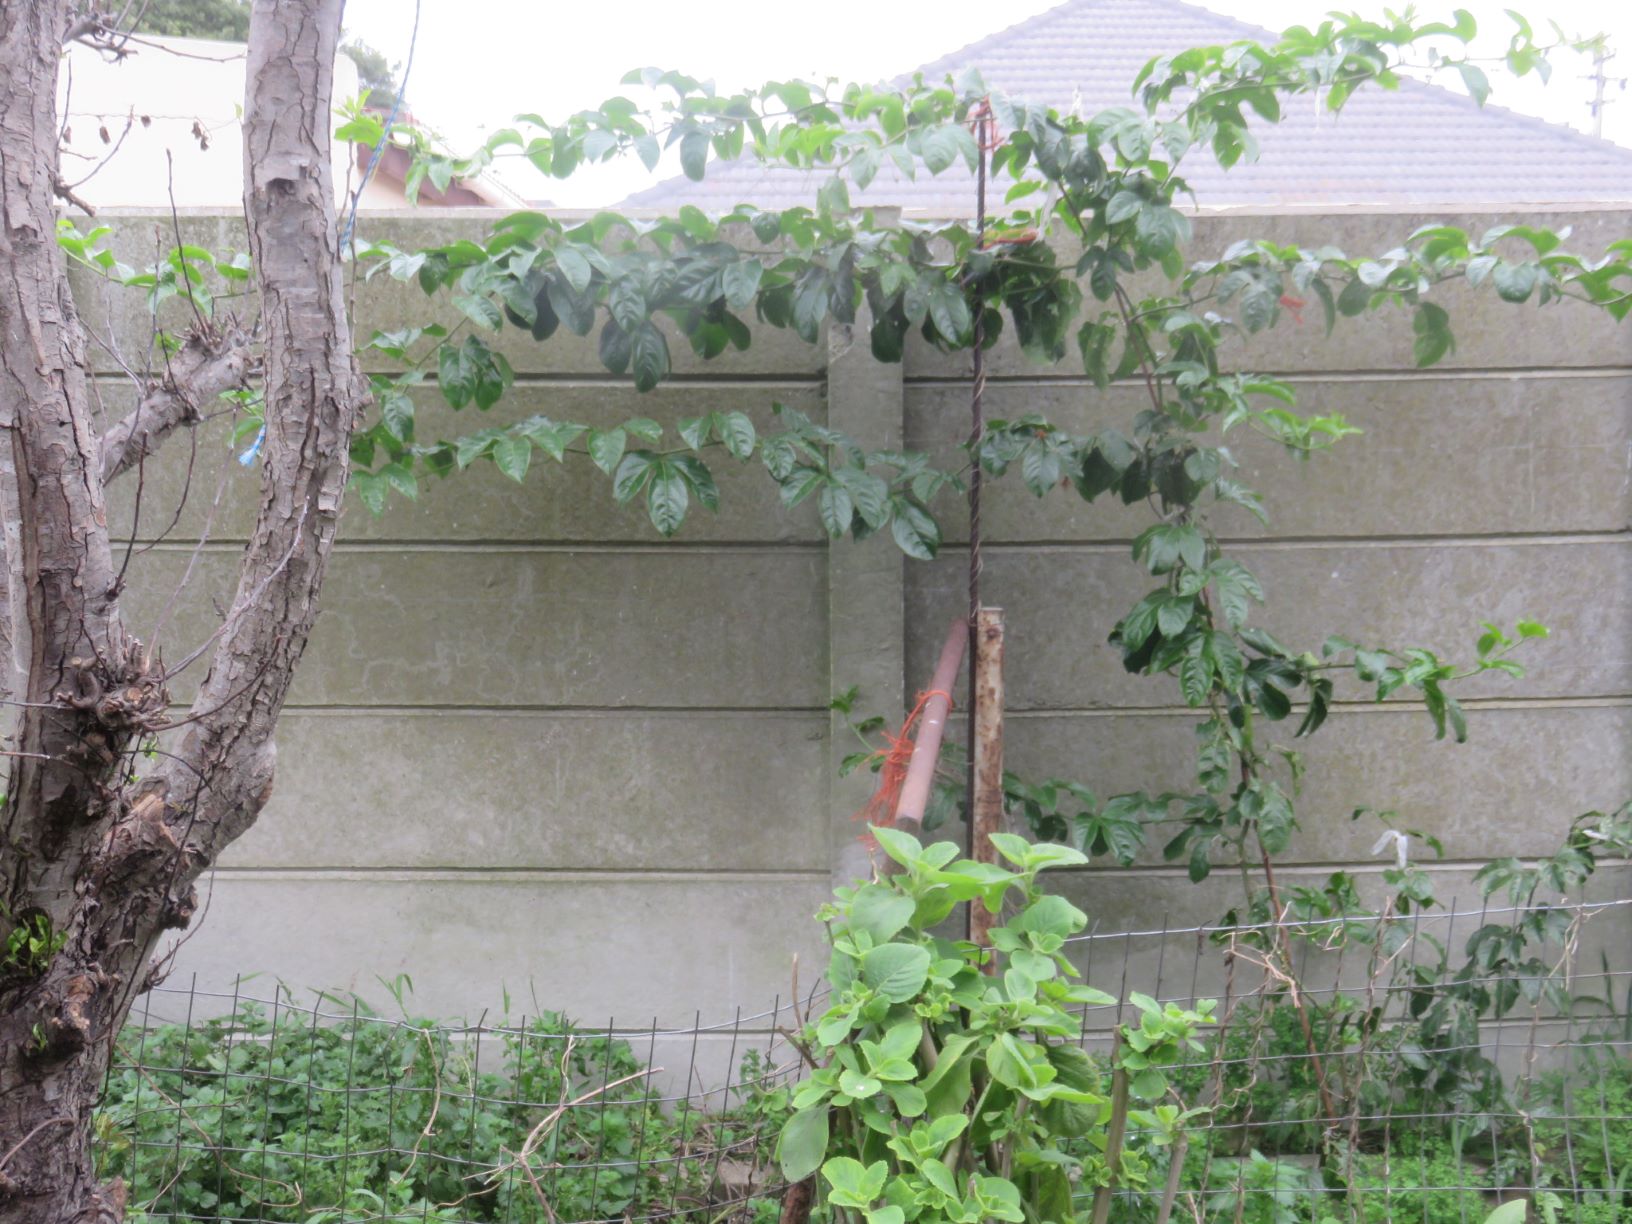 Nearly a year later, the vine gnawed to the brink of life is thriving